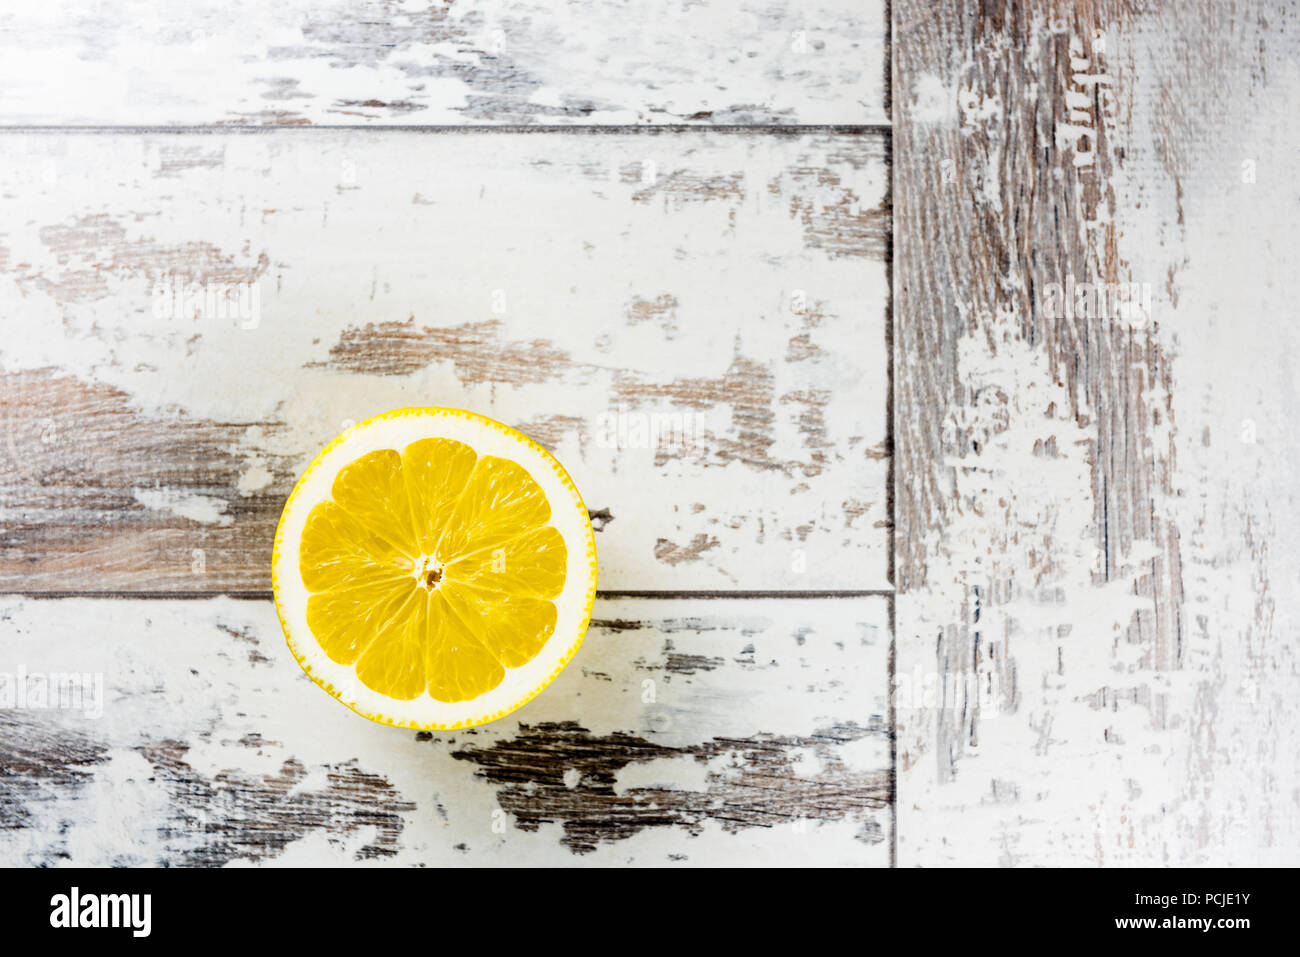 Over head view of half a cut lemon on a rustic wooden table Stock Photo